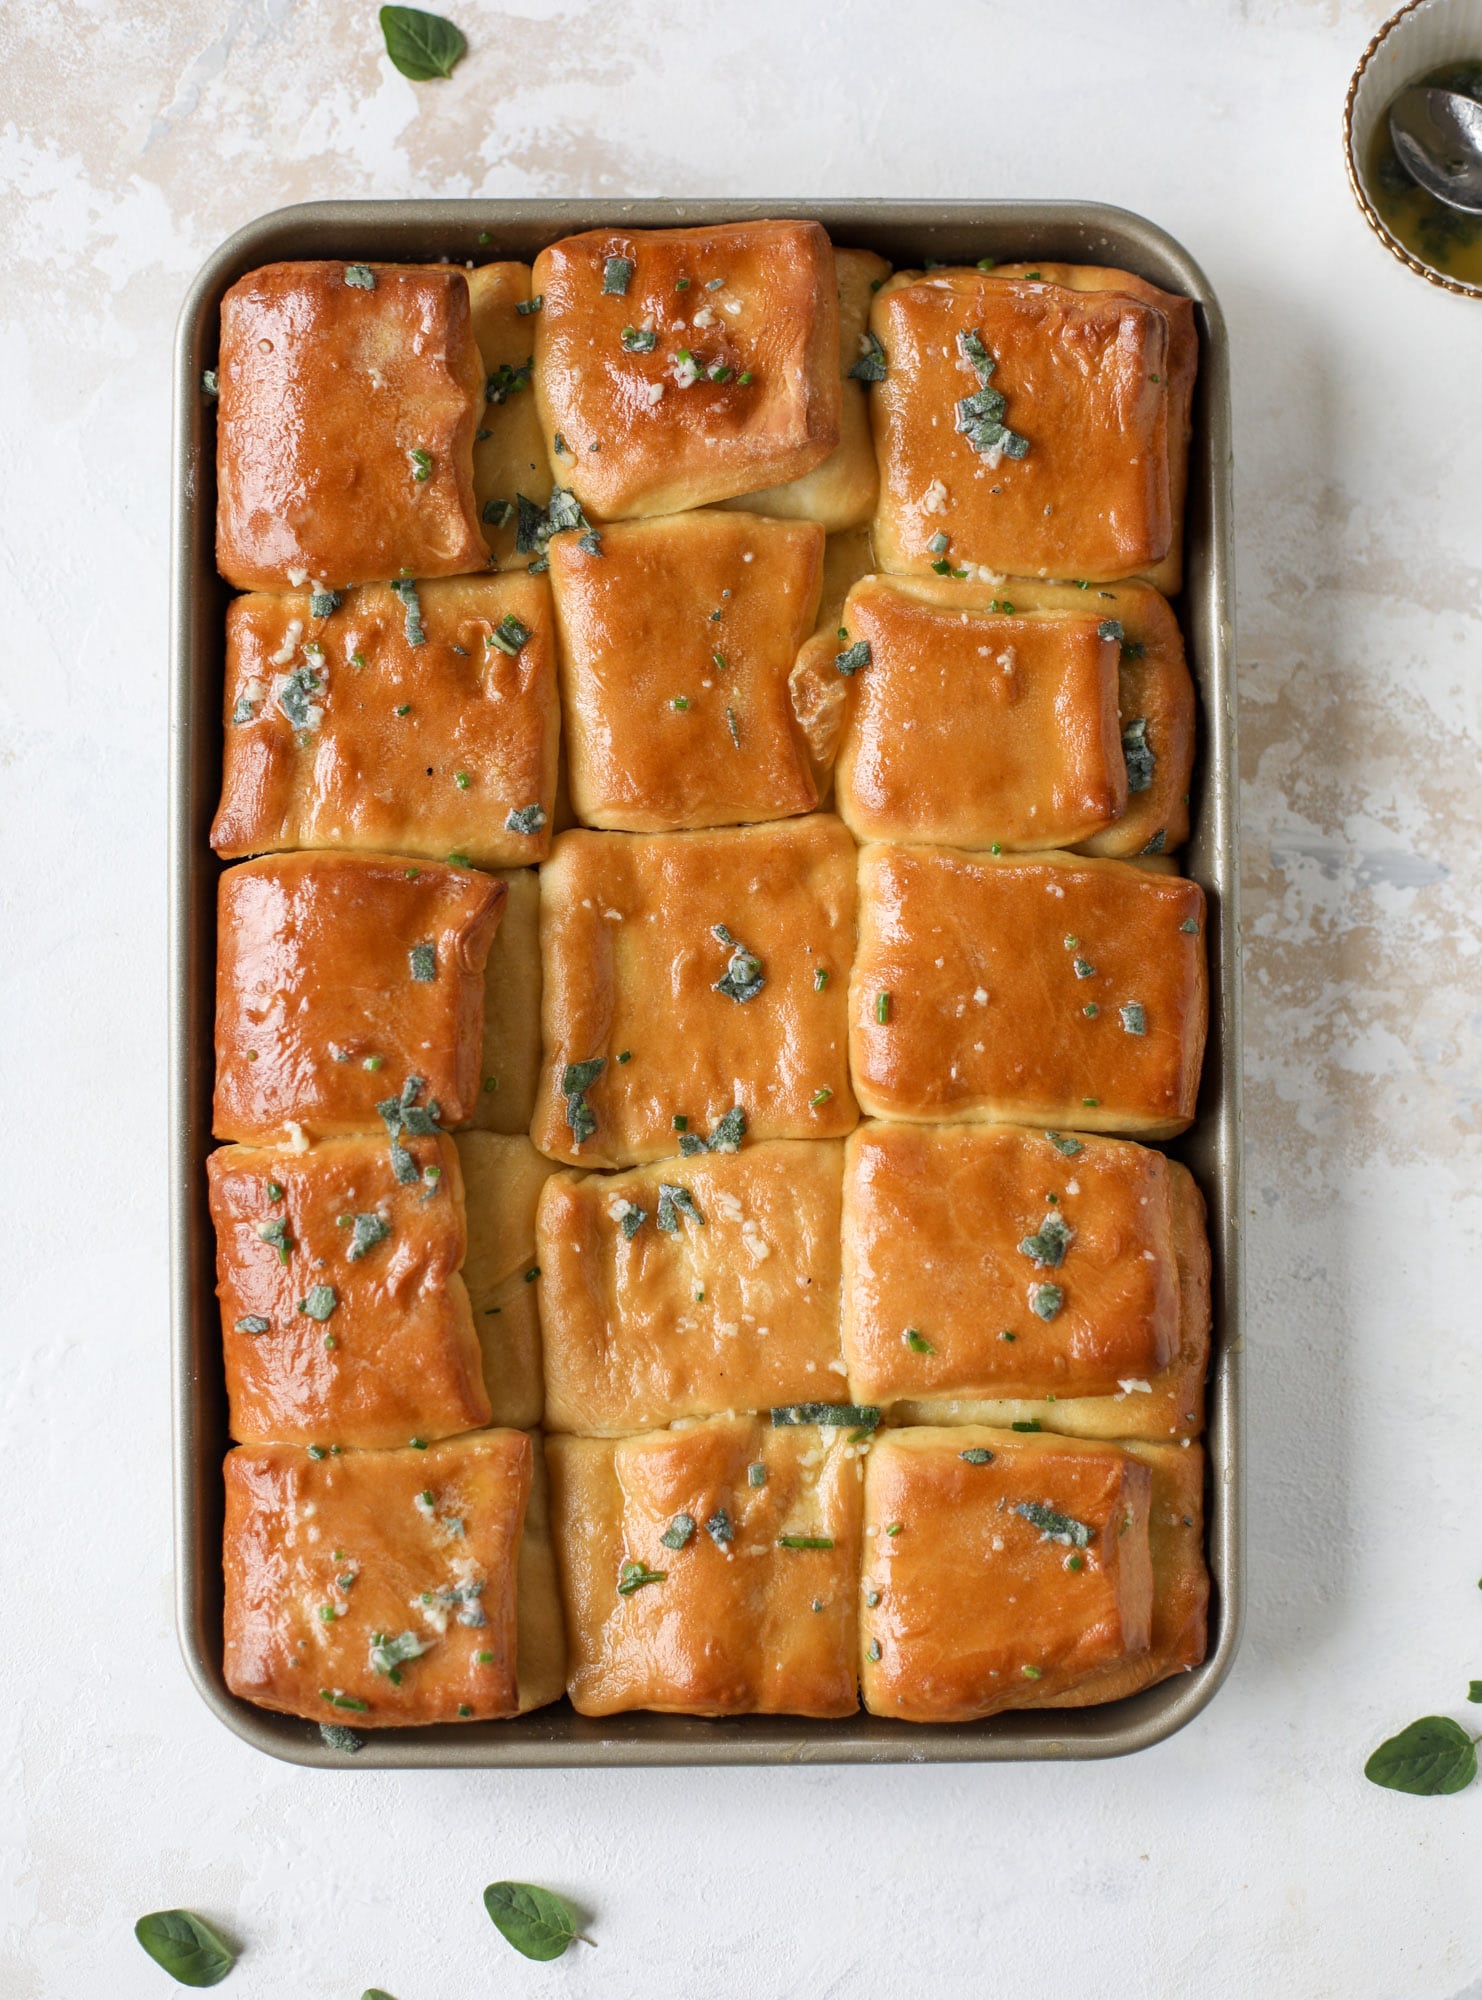 Garlic herb parker house rolls are full of incredibly buttery flavor! They are brushed with a garlic herb butter and are super fluffy, soft and tender. Perfect for Thanksgiving or the holidays and you can make the dough a bit ahead of time! I howsweeteats.com #parkerhouse #rolls